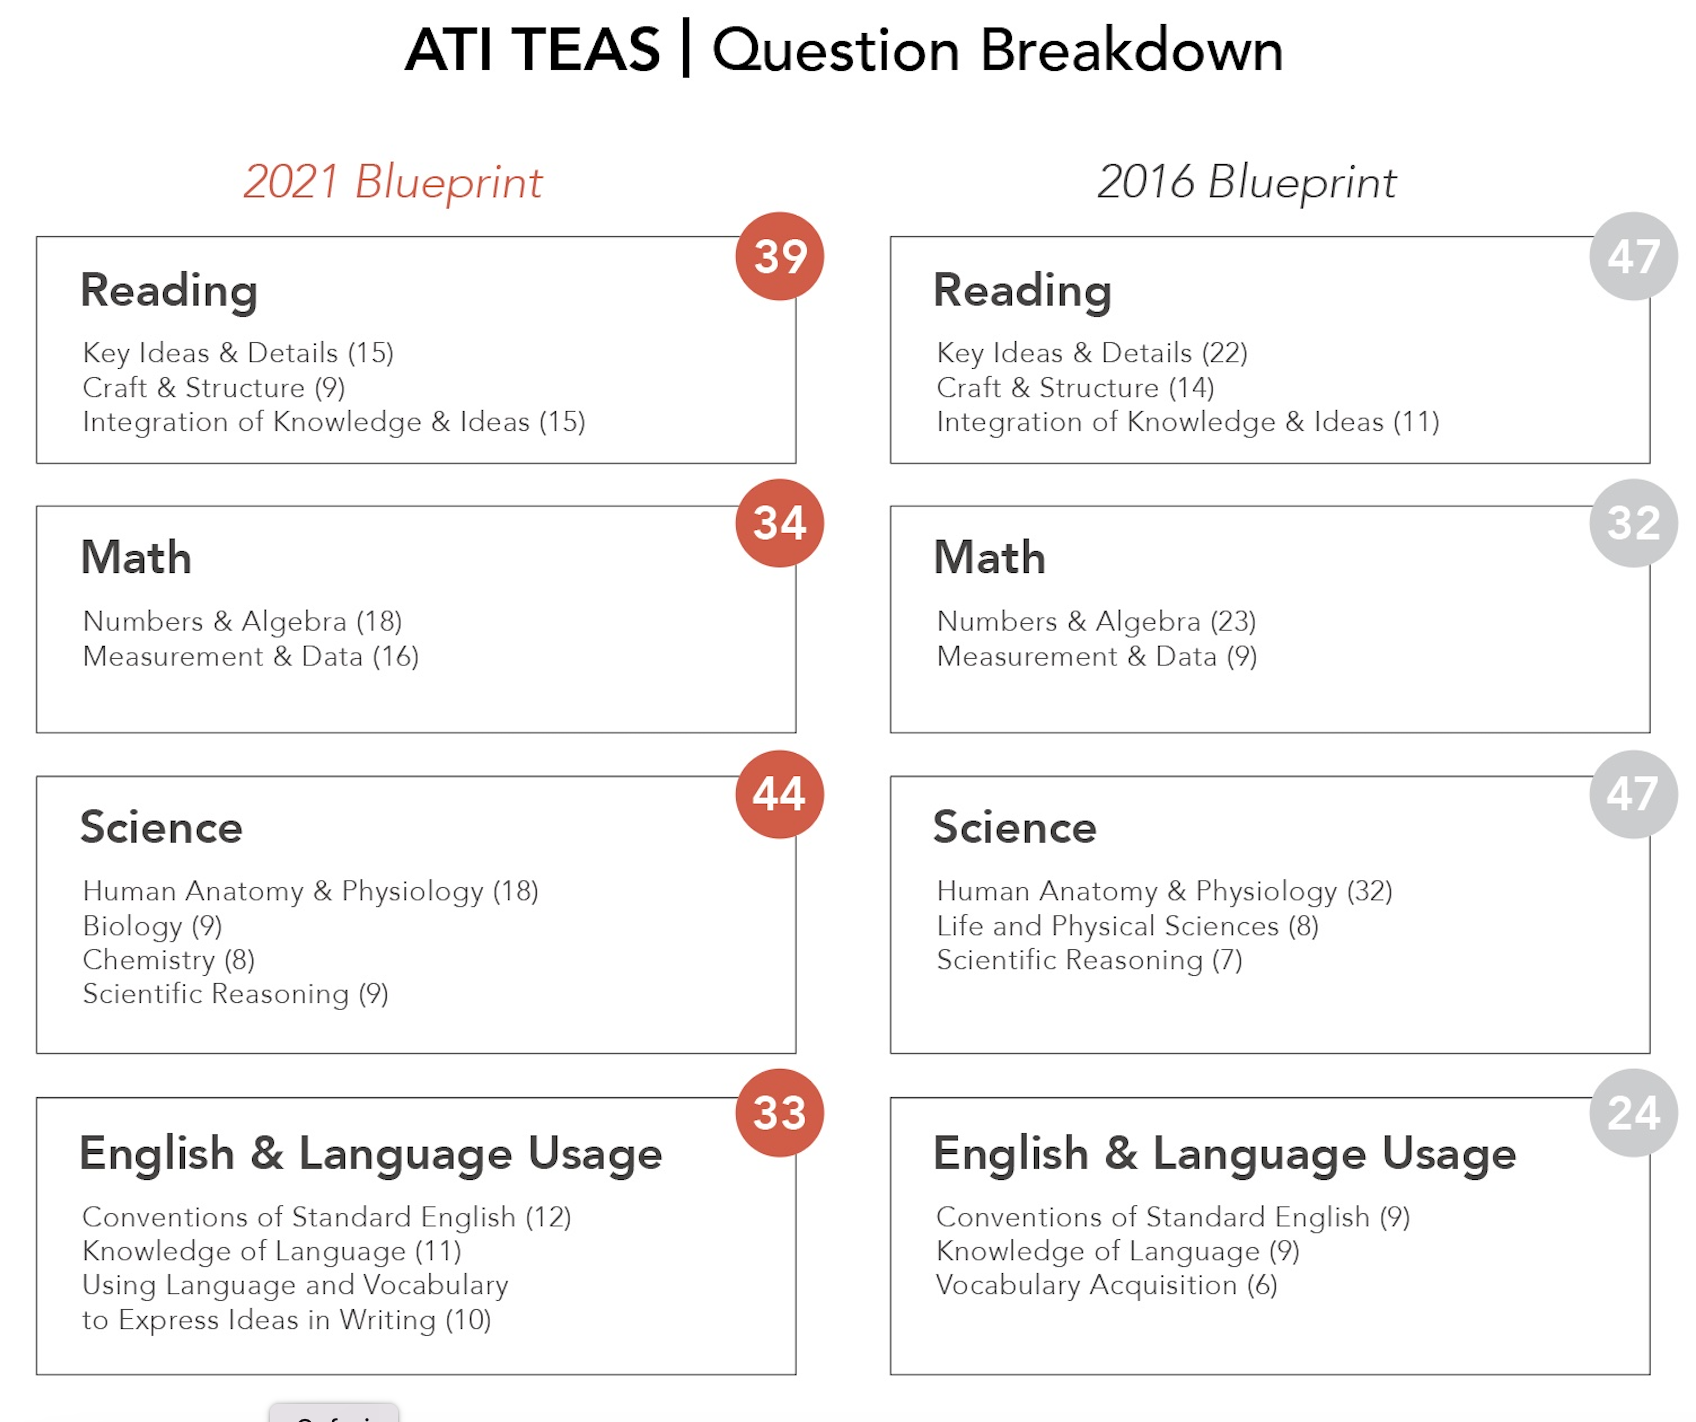 What are the differences between the TEAS 6 and TEAS 7?